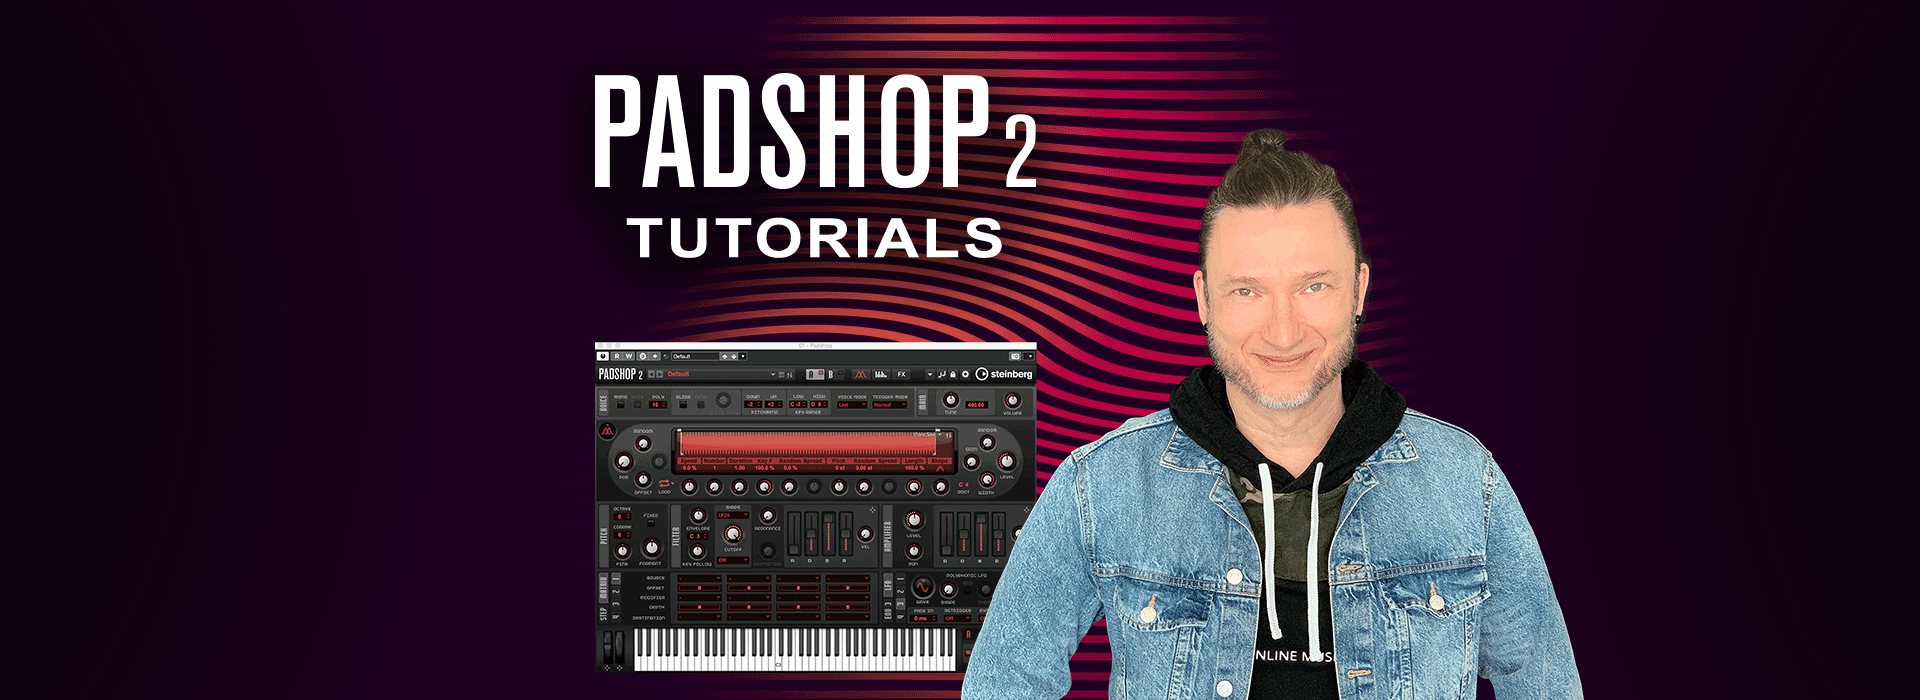 Padshop Tutorials with Gary Gibbons